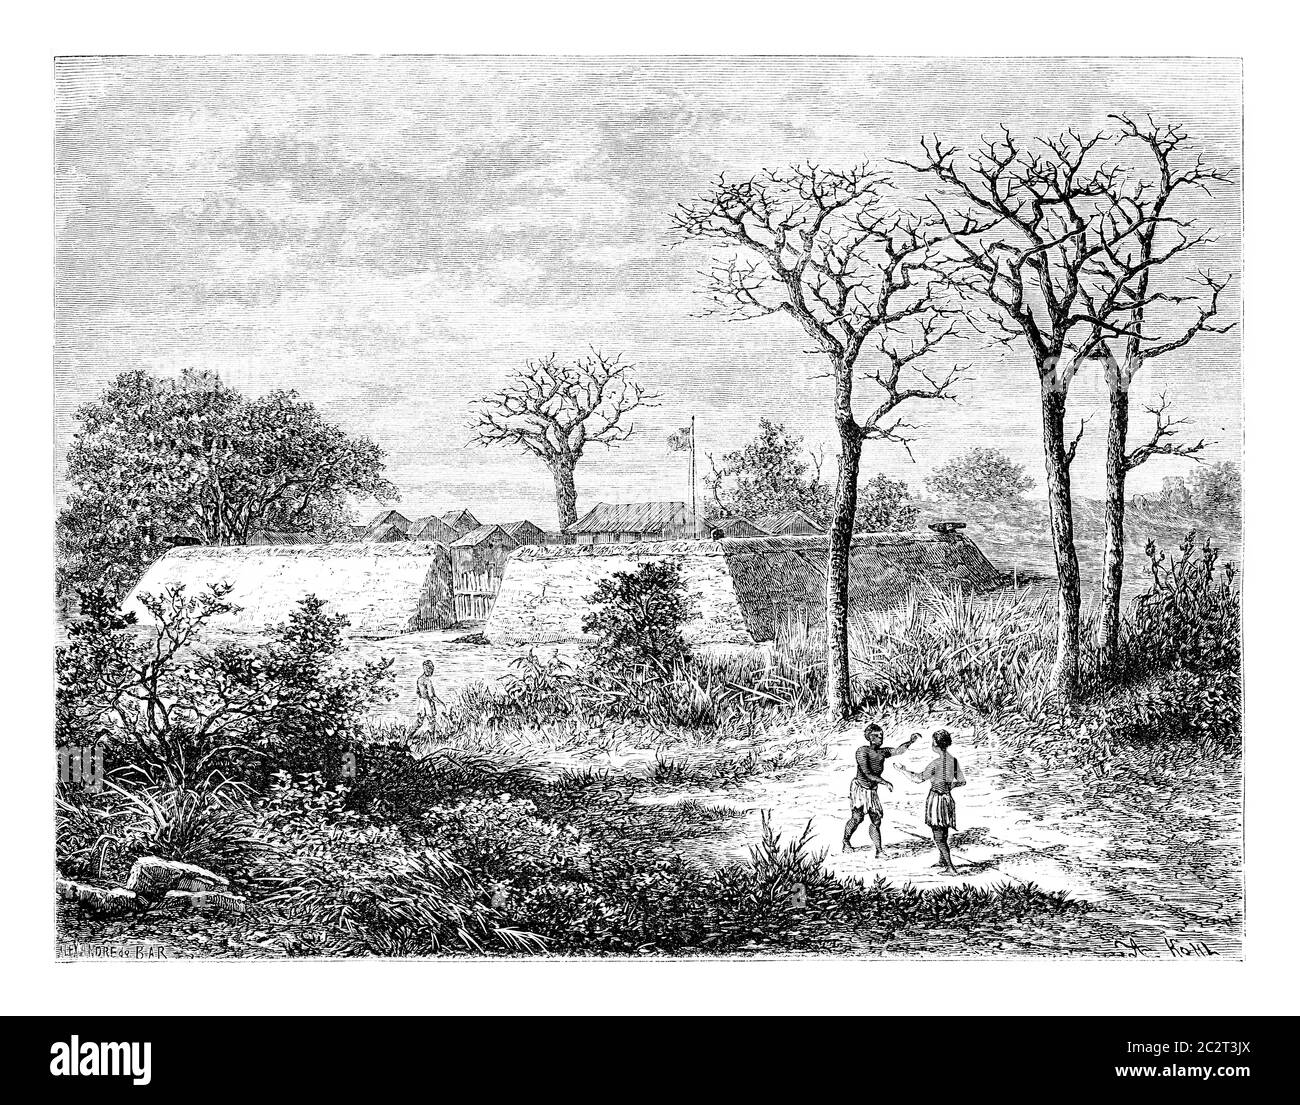 Caconda in Angola, Southern Africa, drawing by De Bar based on a sketch by Serpa Pinto, vintage engraved illustration. Le Tour du Monde, Travel Journa Stock Photo